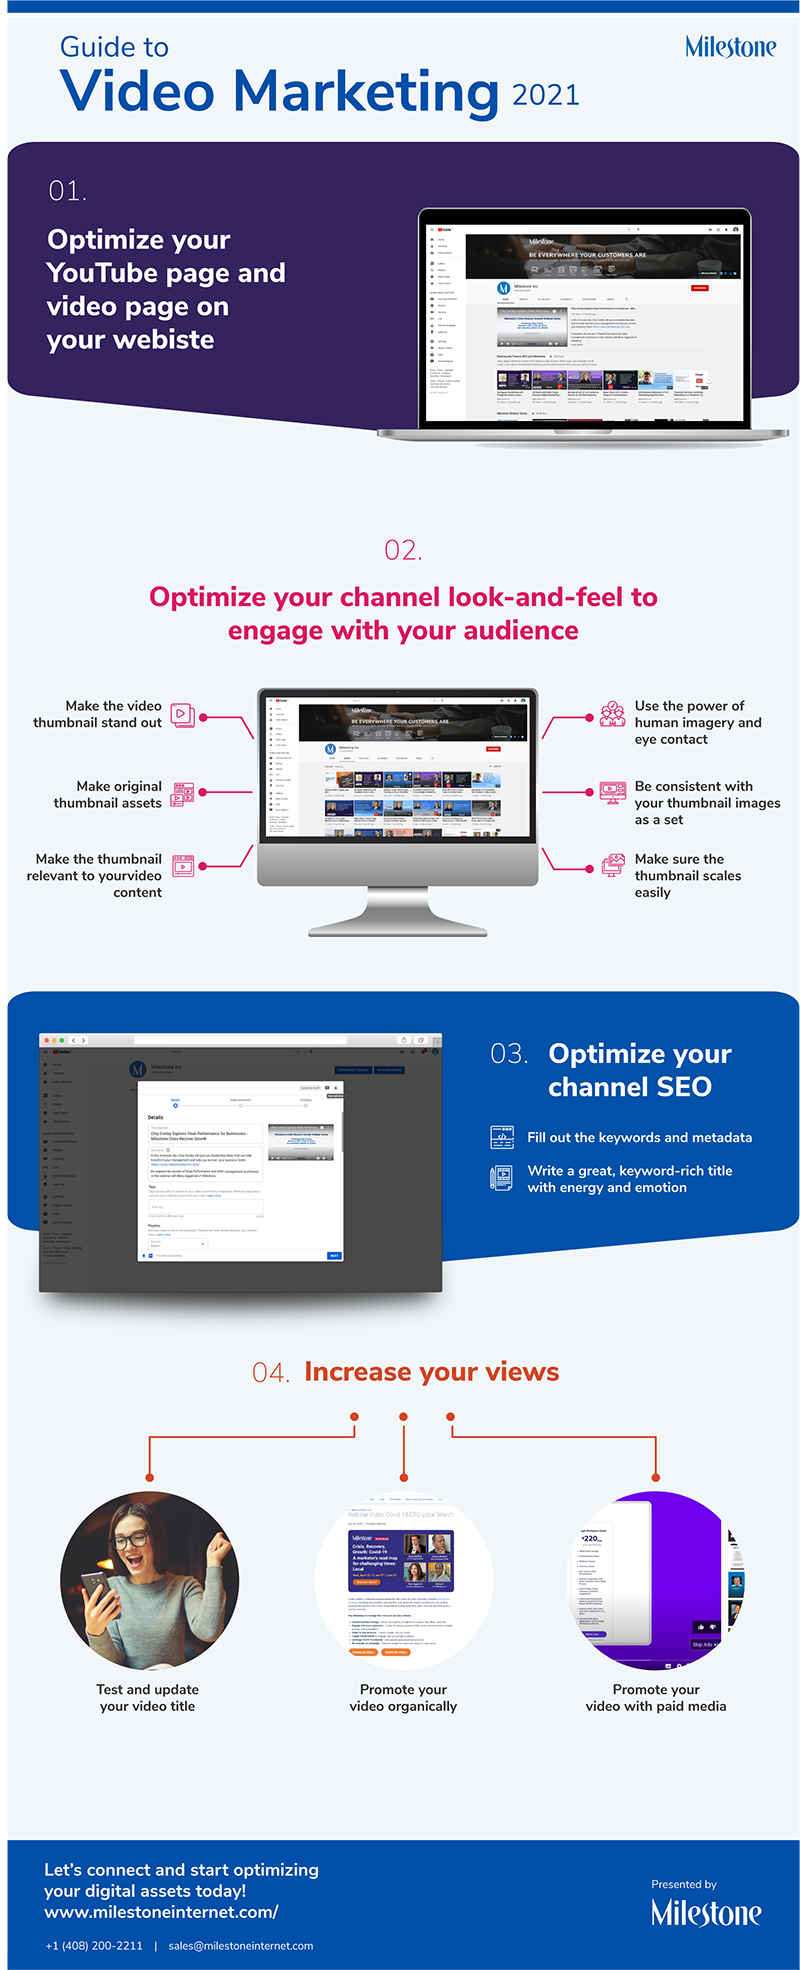 Guide to Video Marketing